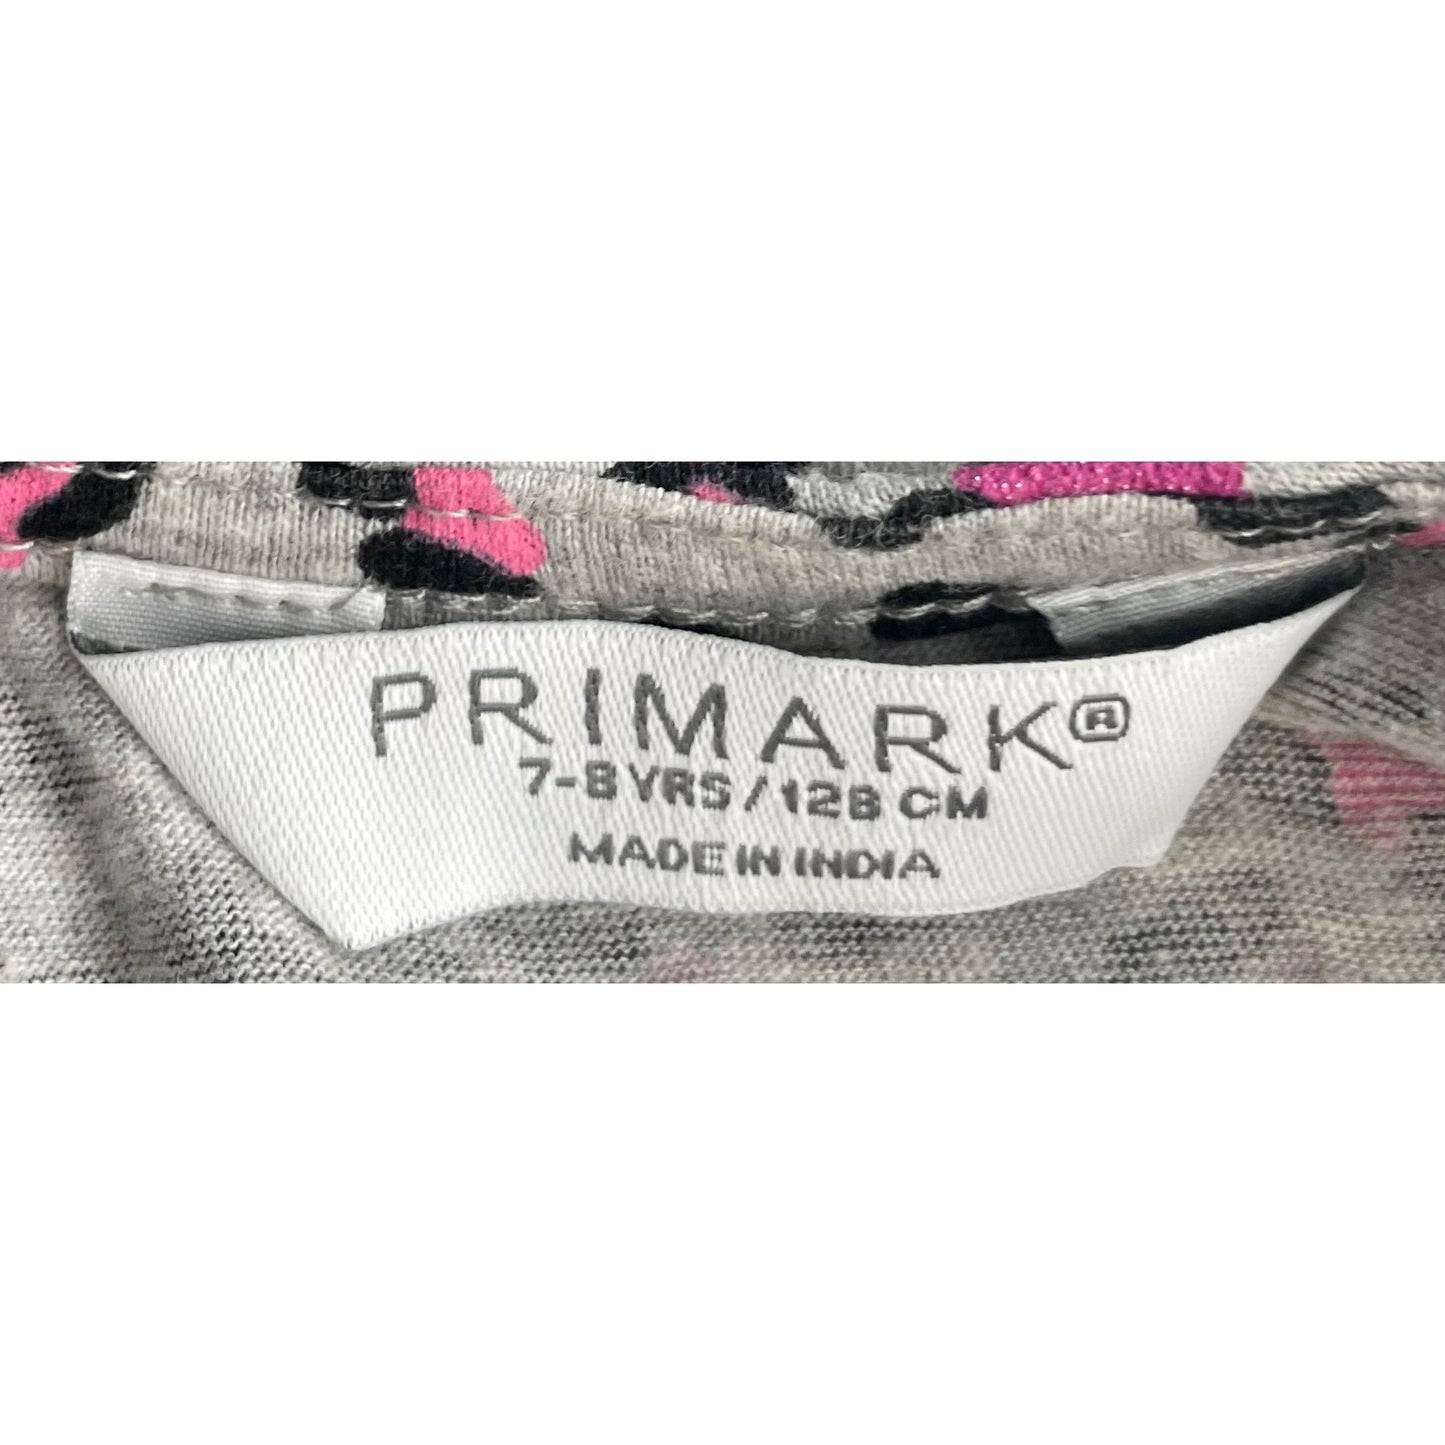 Primark Girl's Size 7-8 Years Black/Green/Pink Sparkly Leopard Print Sleeveless Dress